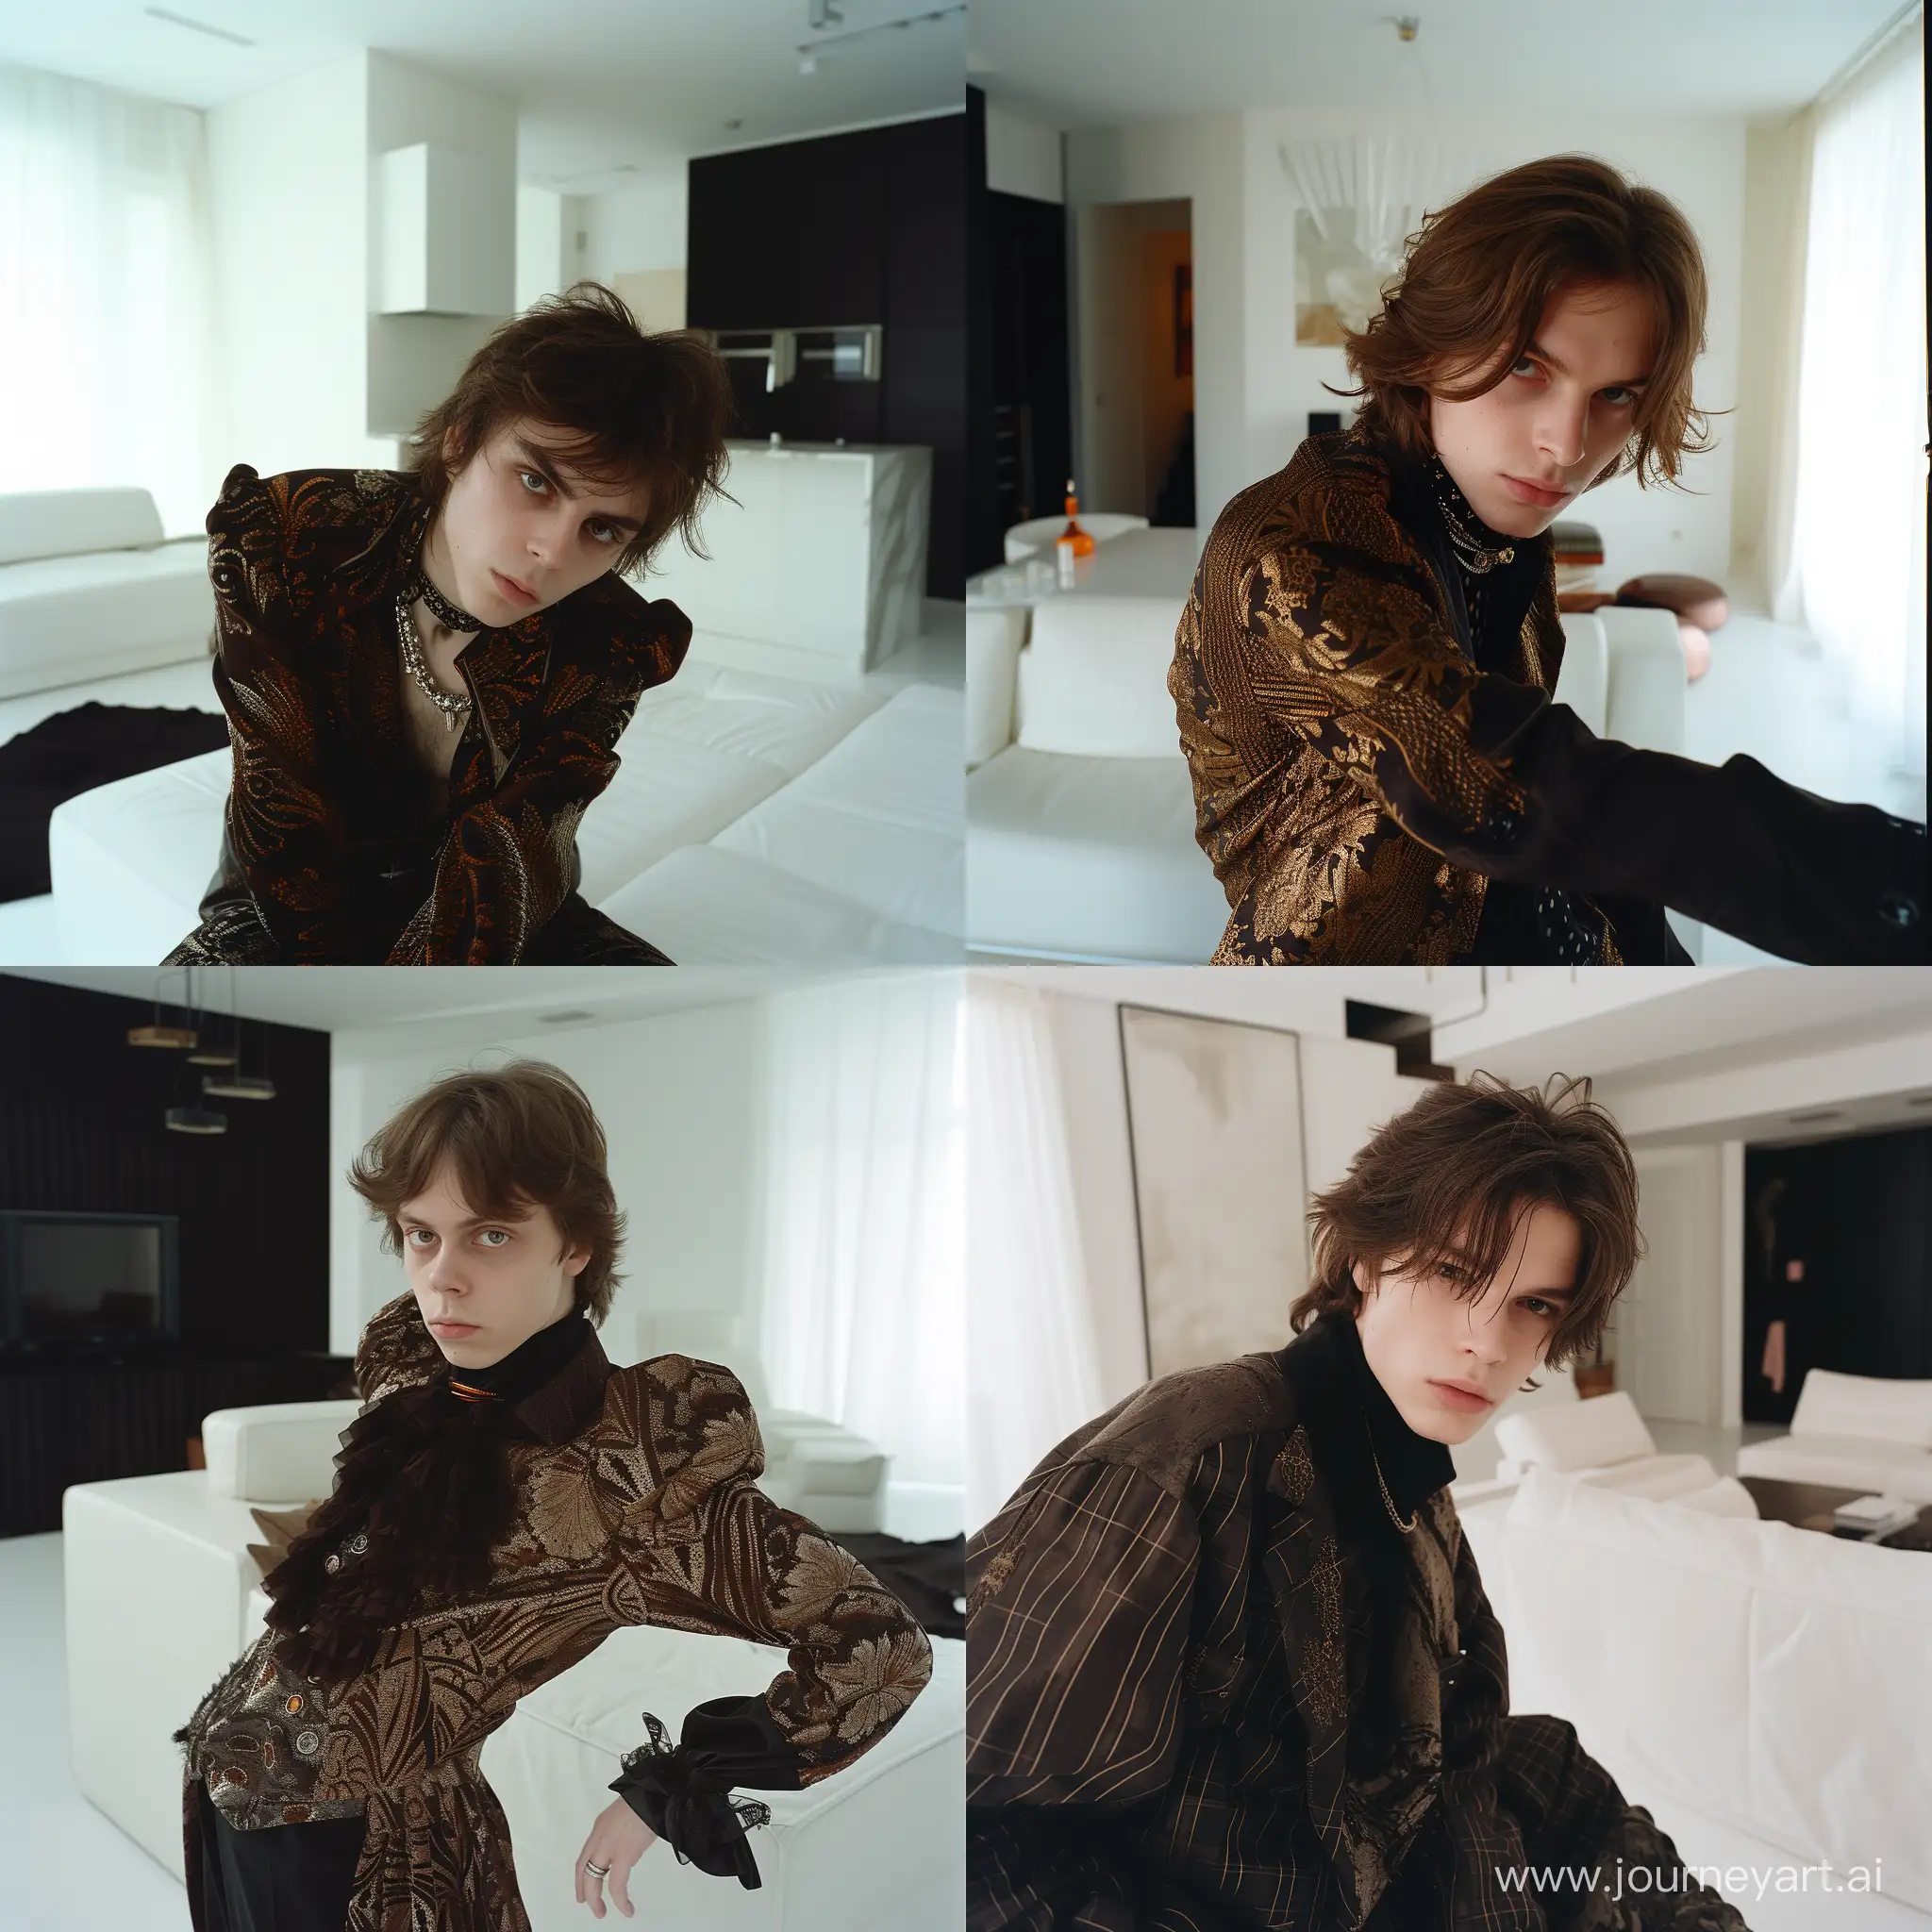 Candid photo of an eccentric, cheeky 20-year-old Slavic type guy, brown-haired, stern-eyed, in couture clothes, posing in a white modern living room, black and brown pastel tones, 35mm Kodak photo